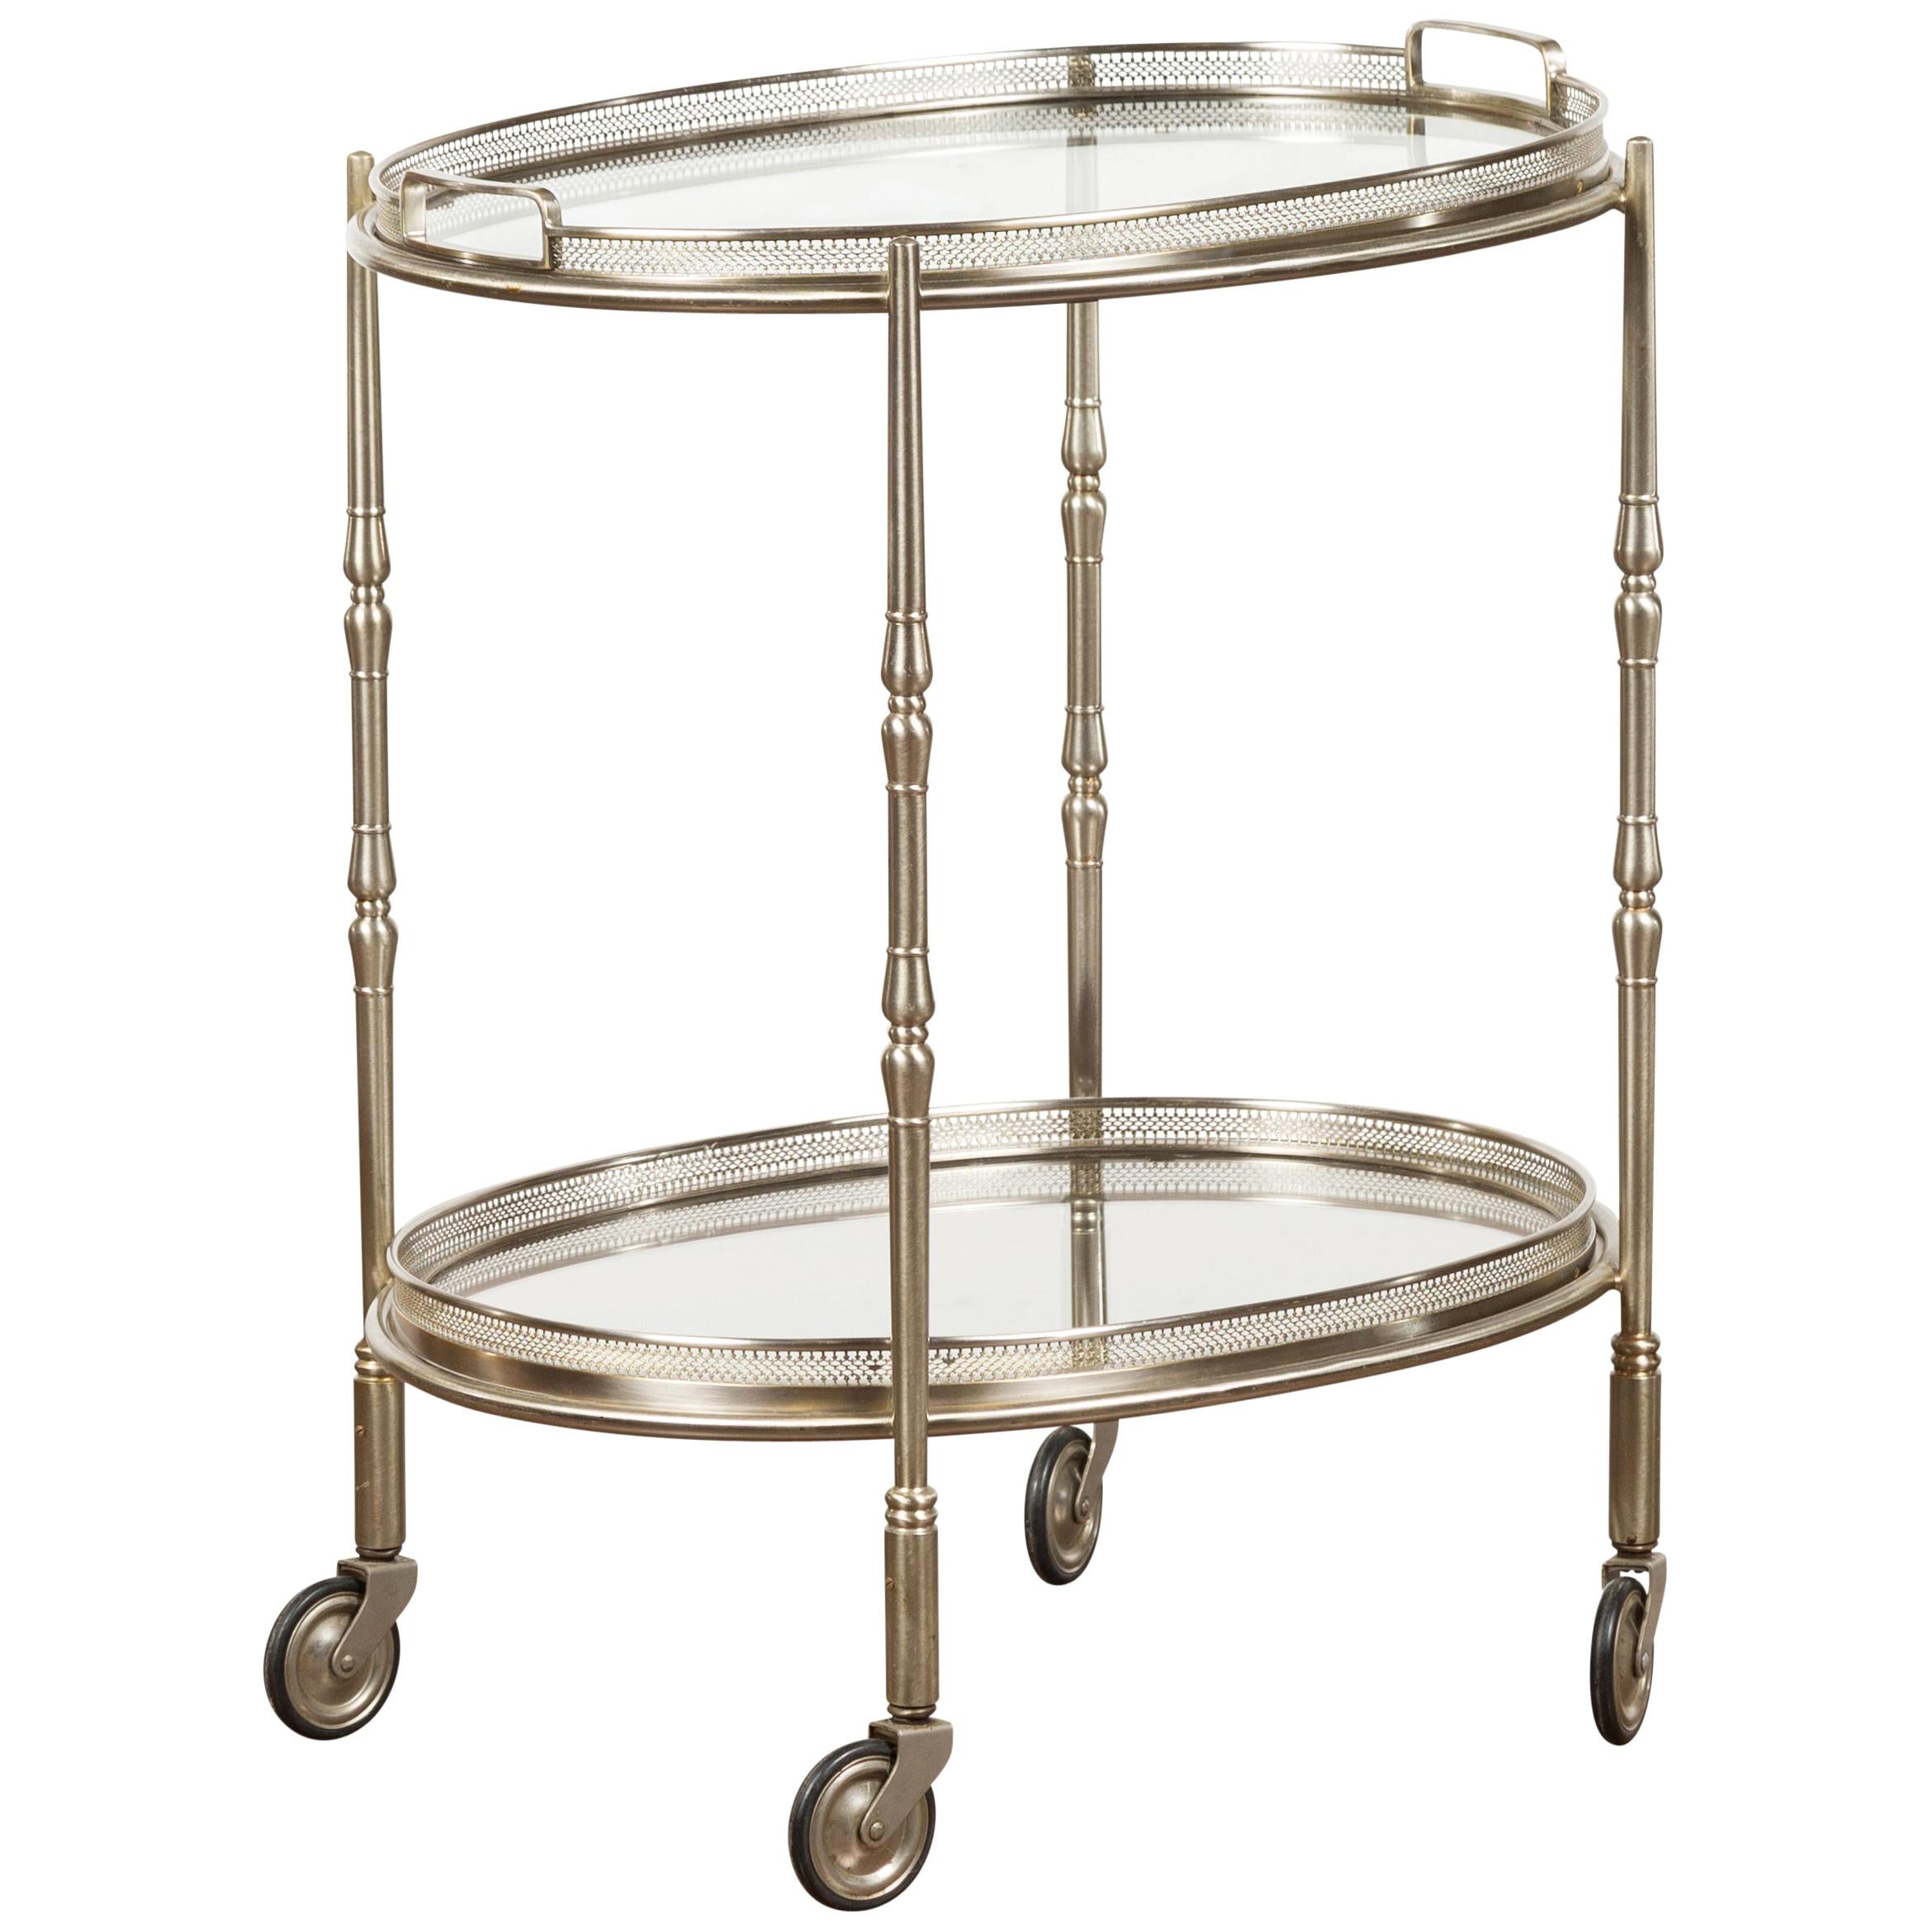 Italian Oval Midcentury Steel Trolley with Pierced Gallery and Mirrored Shelves For Sale